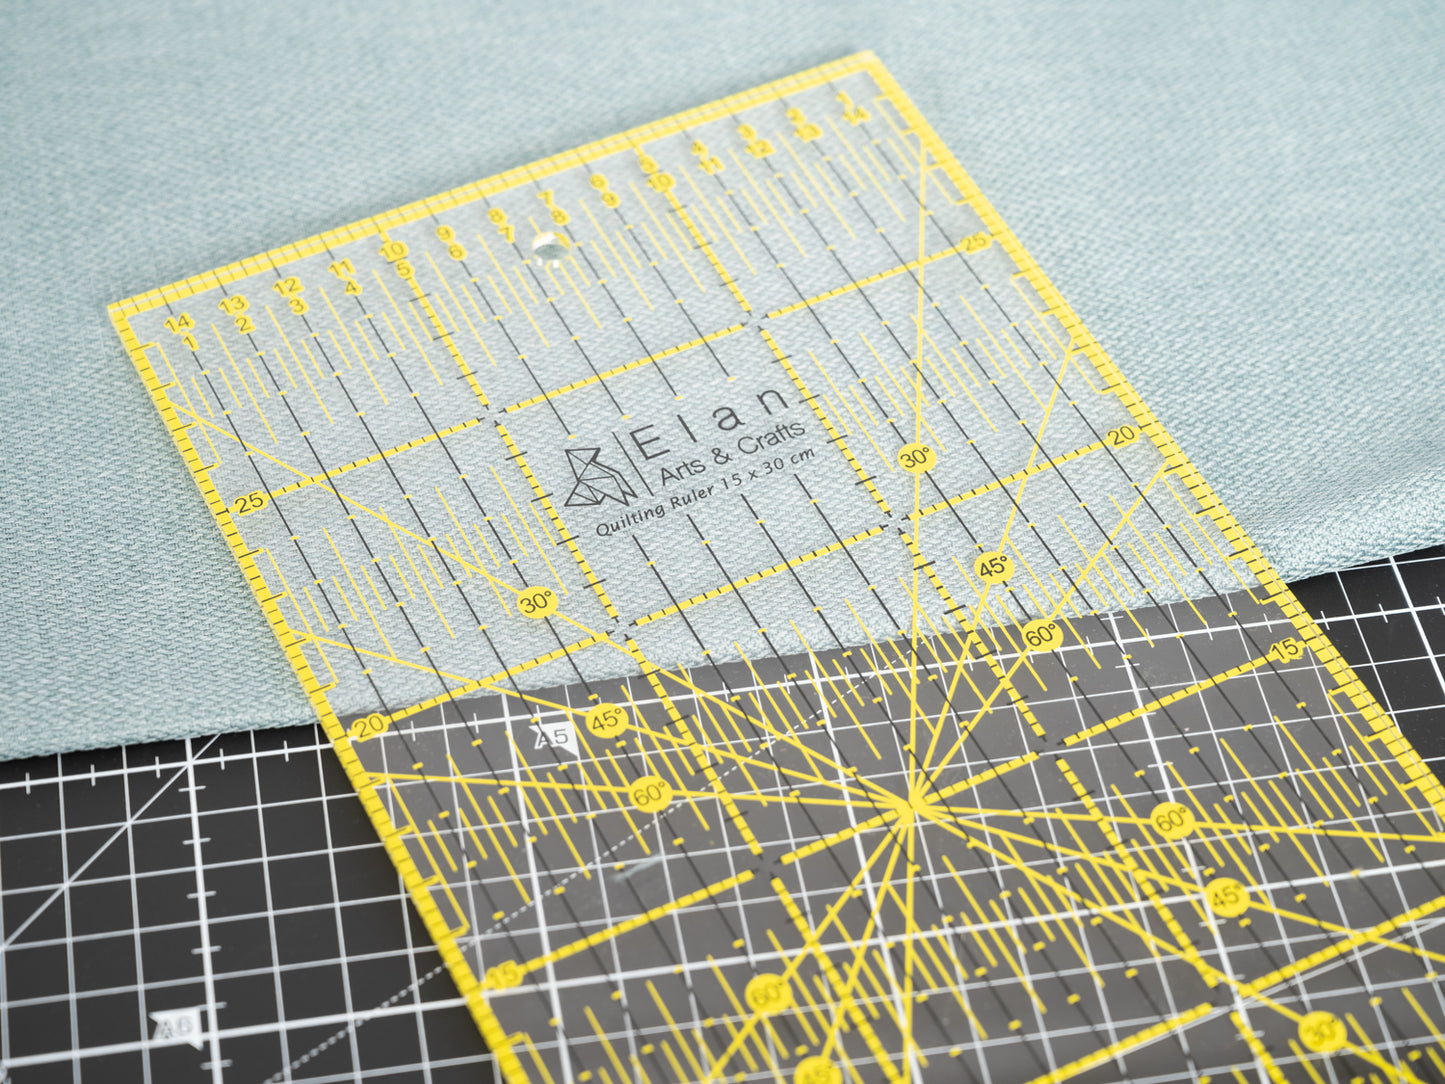 Scenic view of the Elan quilting ruler used on a black cutting mat.